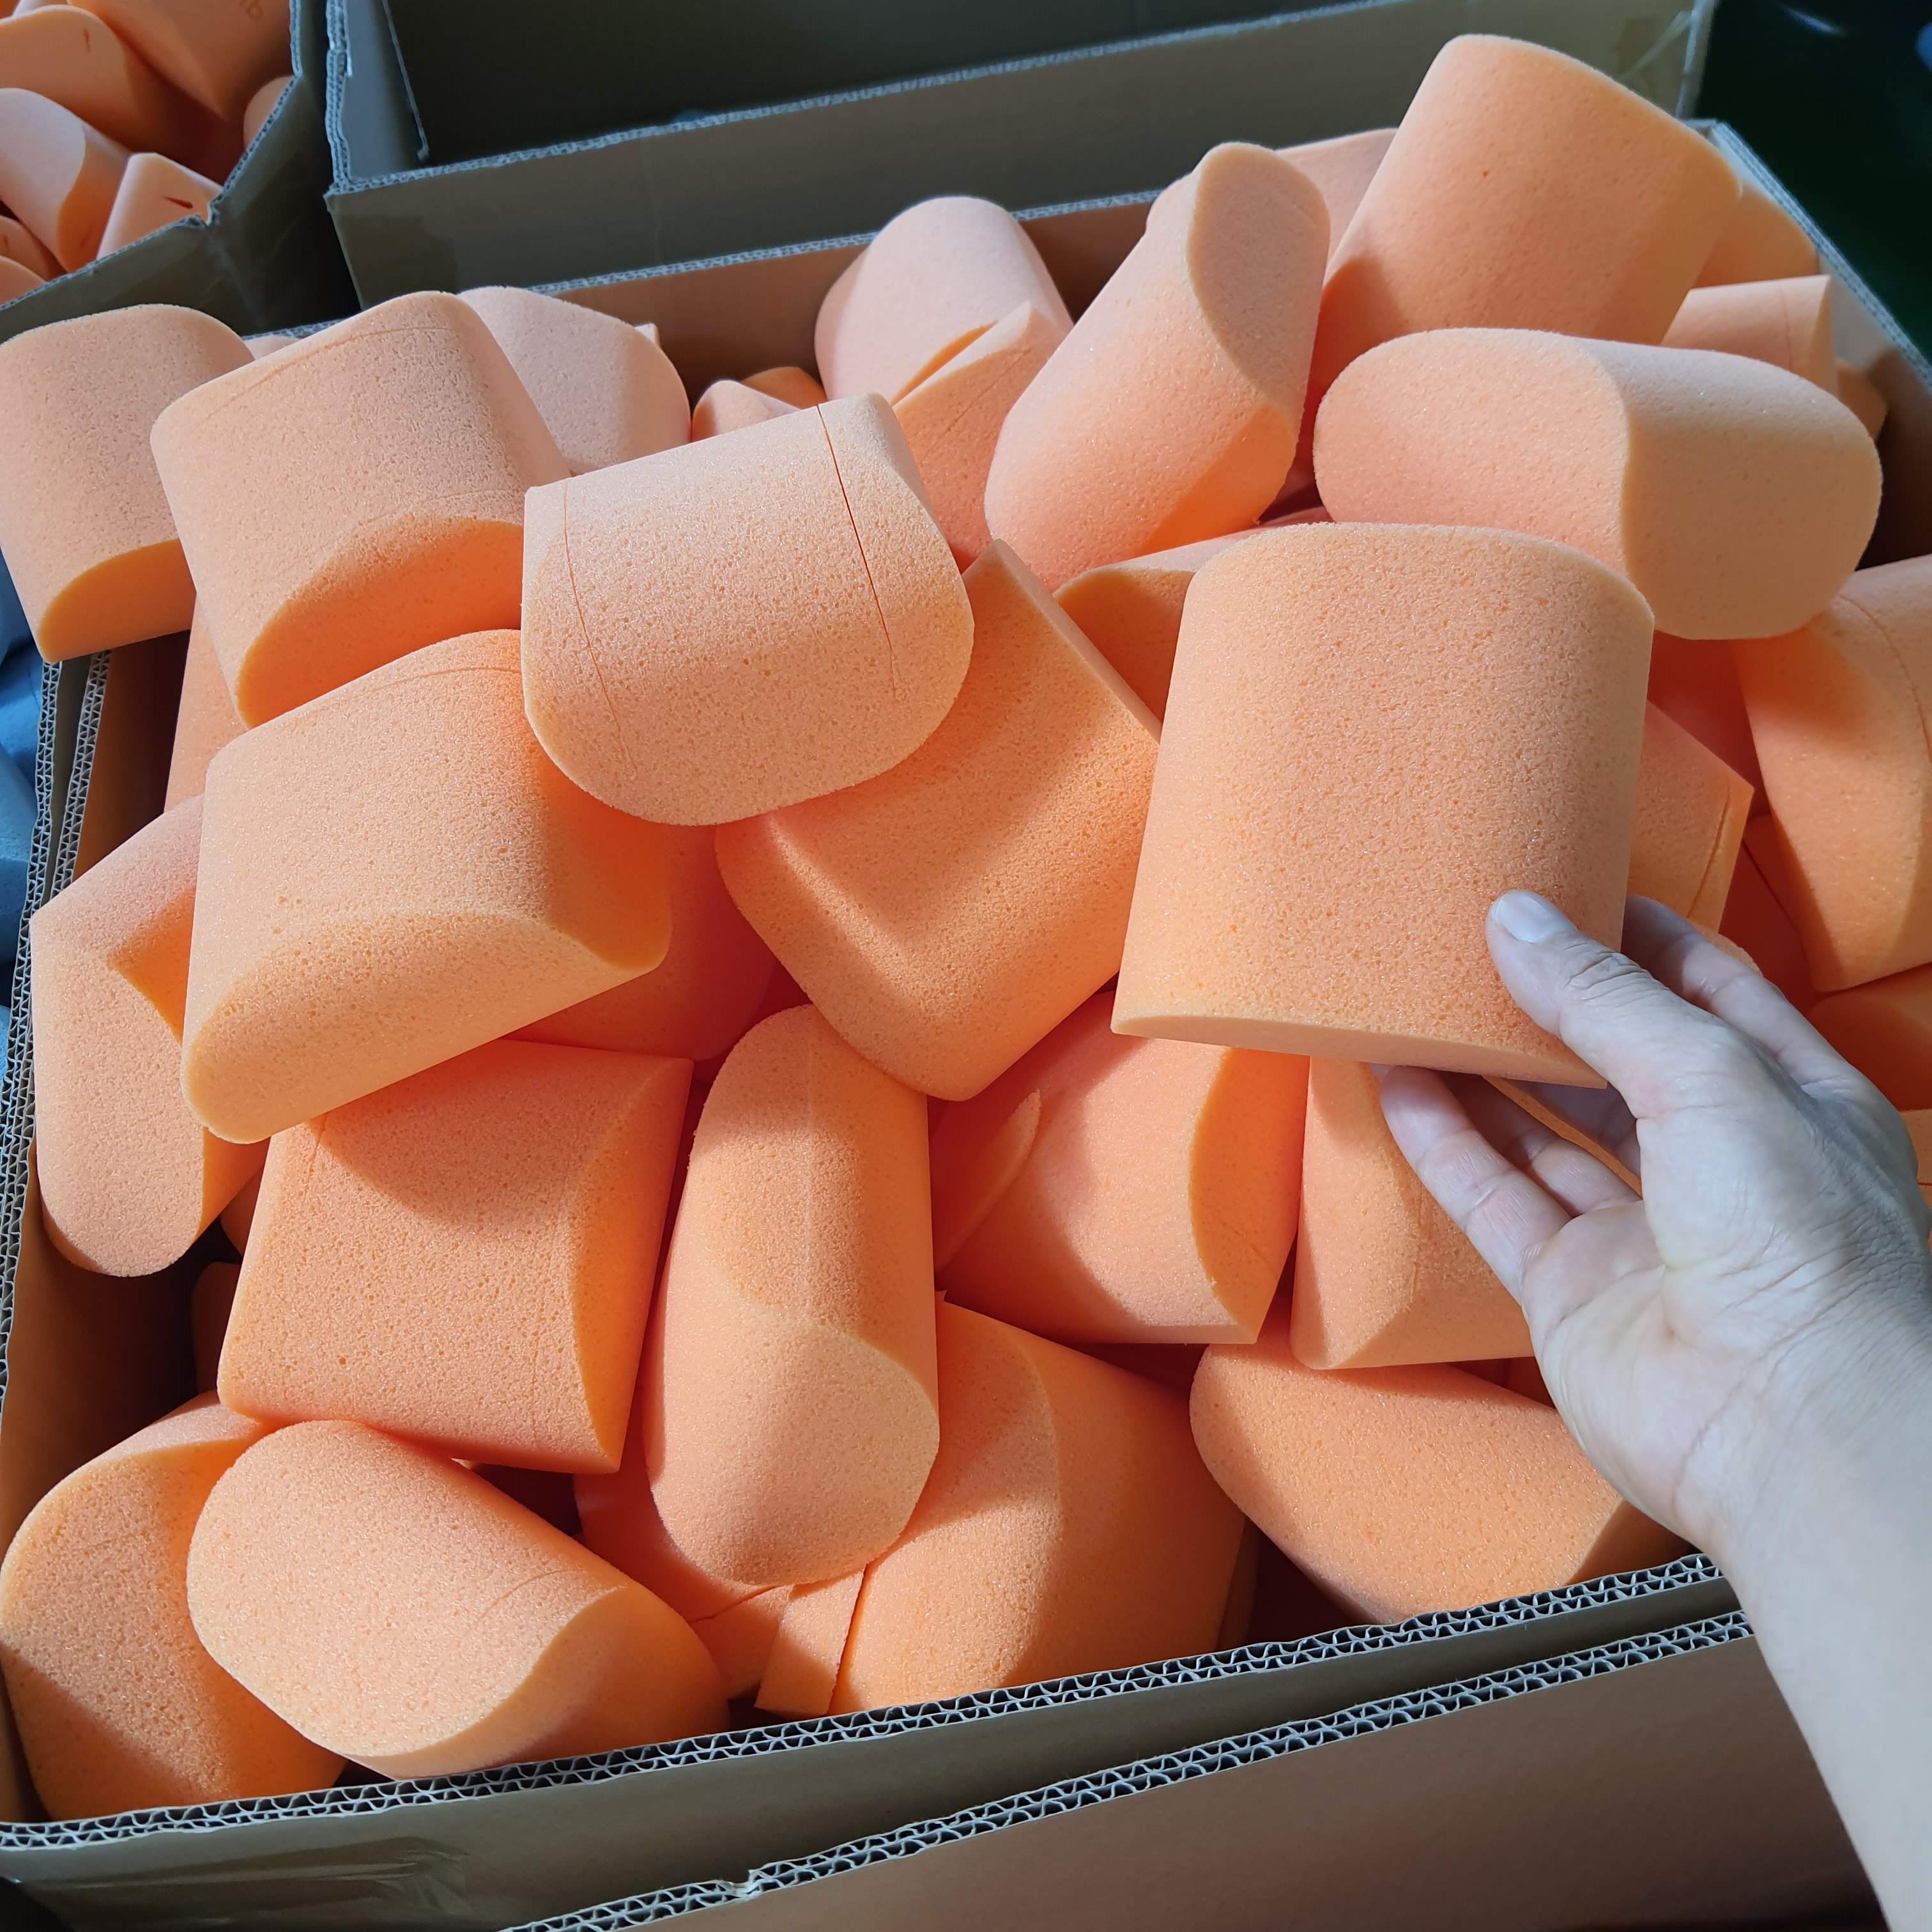 Polyurethane Foam Barrel Good price High Precision Soft Products Material Bags/Boxes Industry Pallets from Vietnam Manufacturer 2